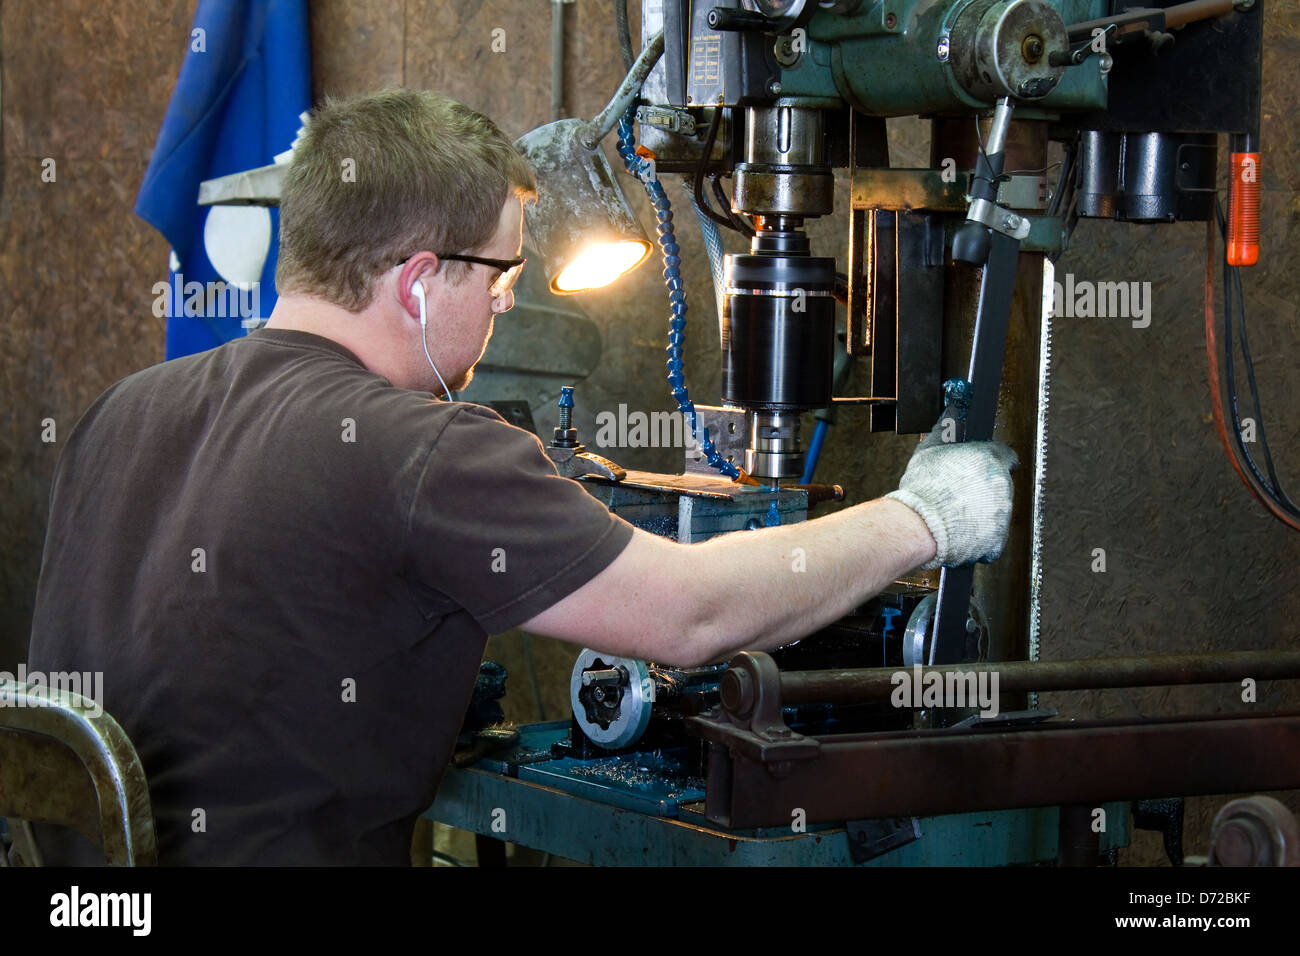 Machinist taps threads into steel using a drill press in production work in a metal shop. Stock Photo